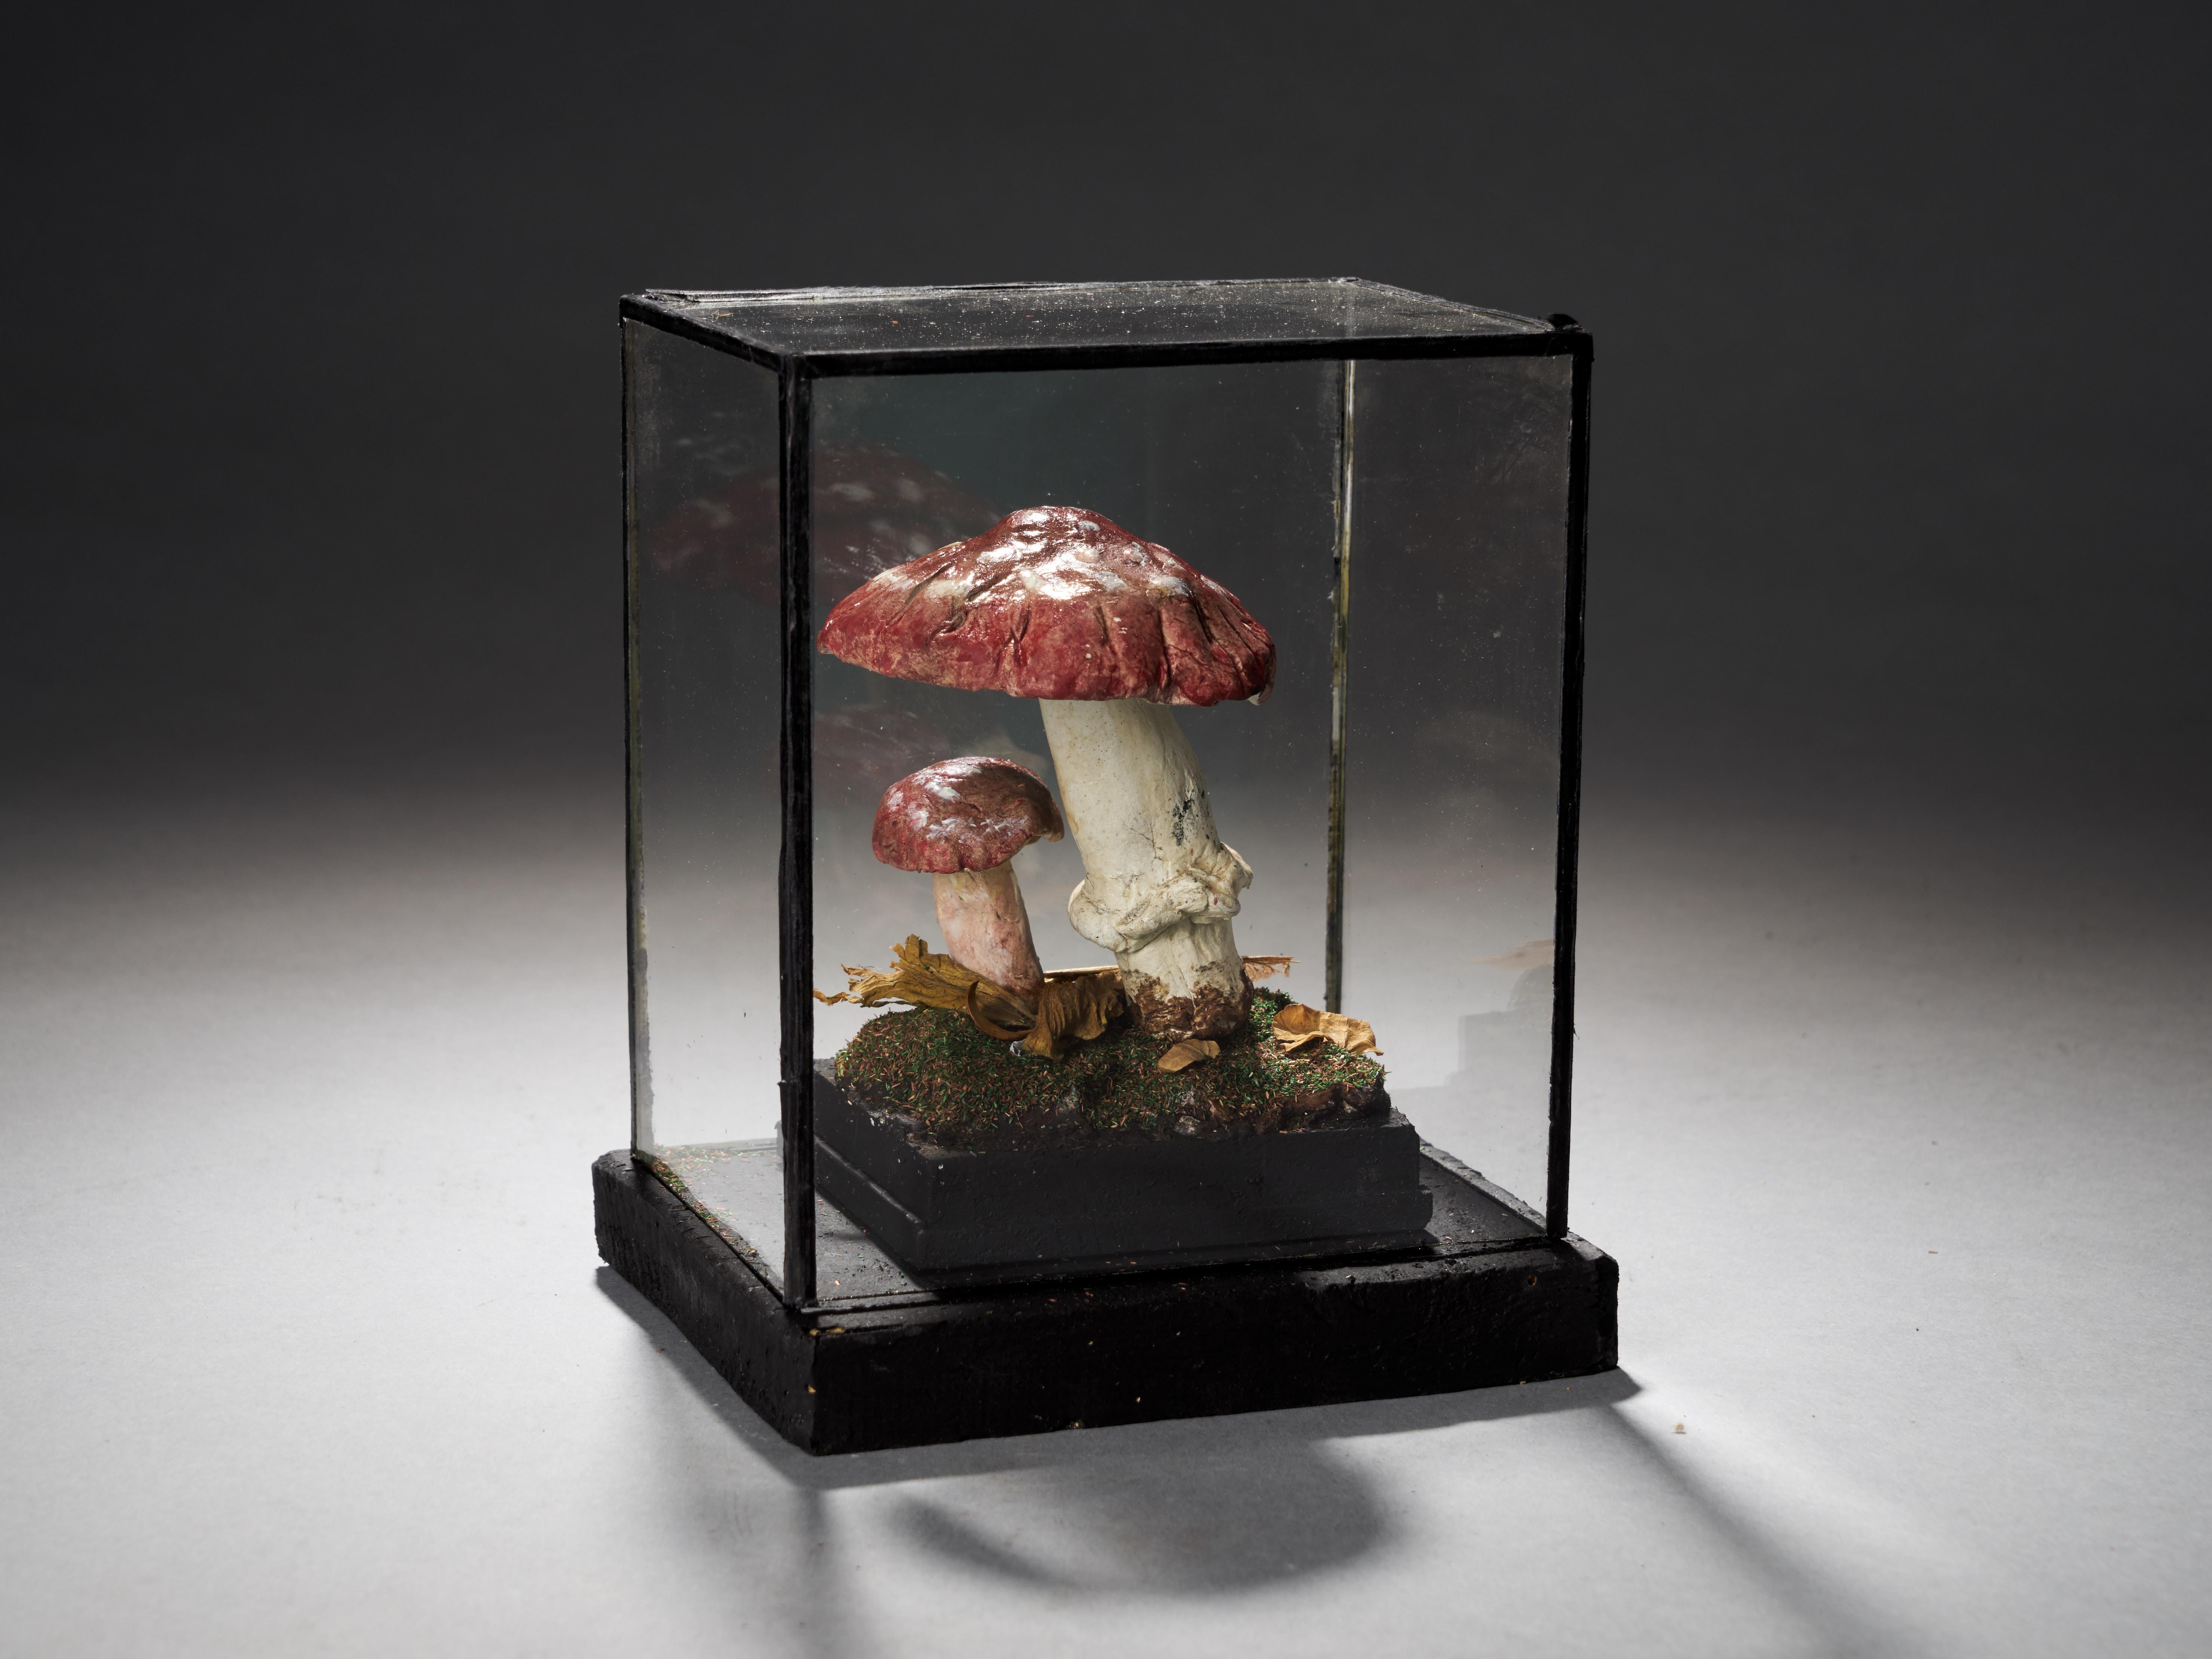 Hand-Crafted Set of Eight Antique Plaster Botanical Models of Mushrooms in Individual Showcas